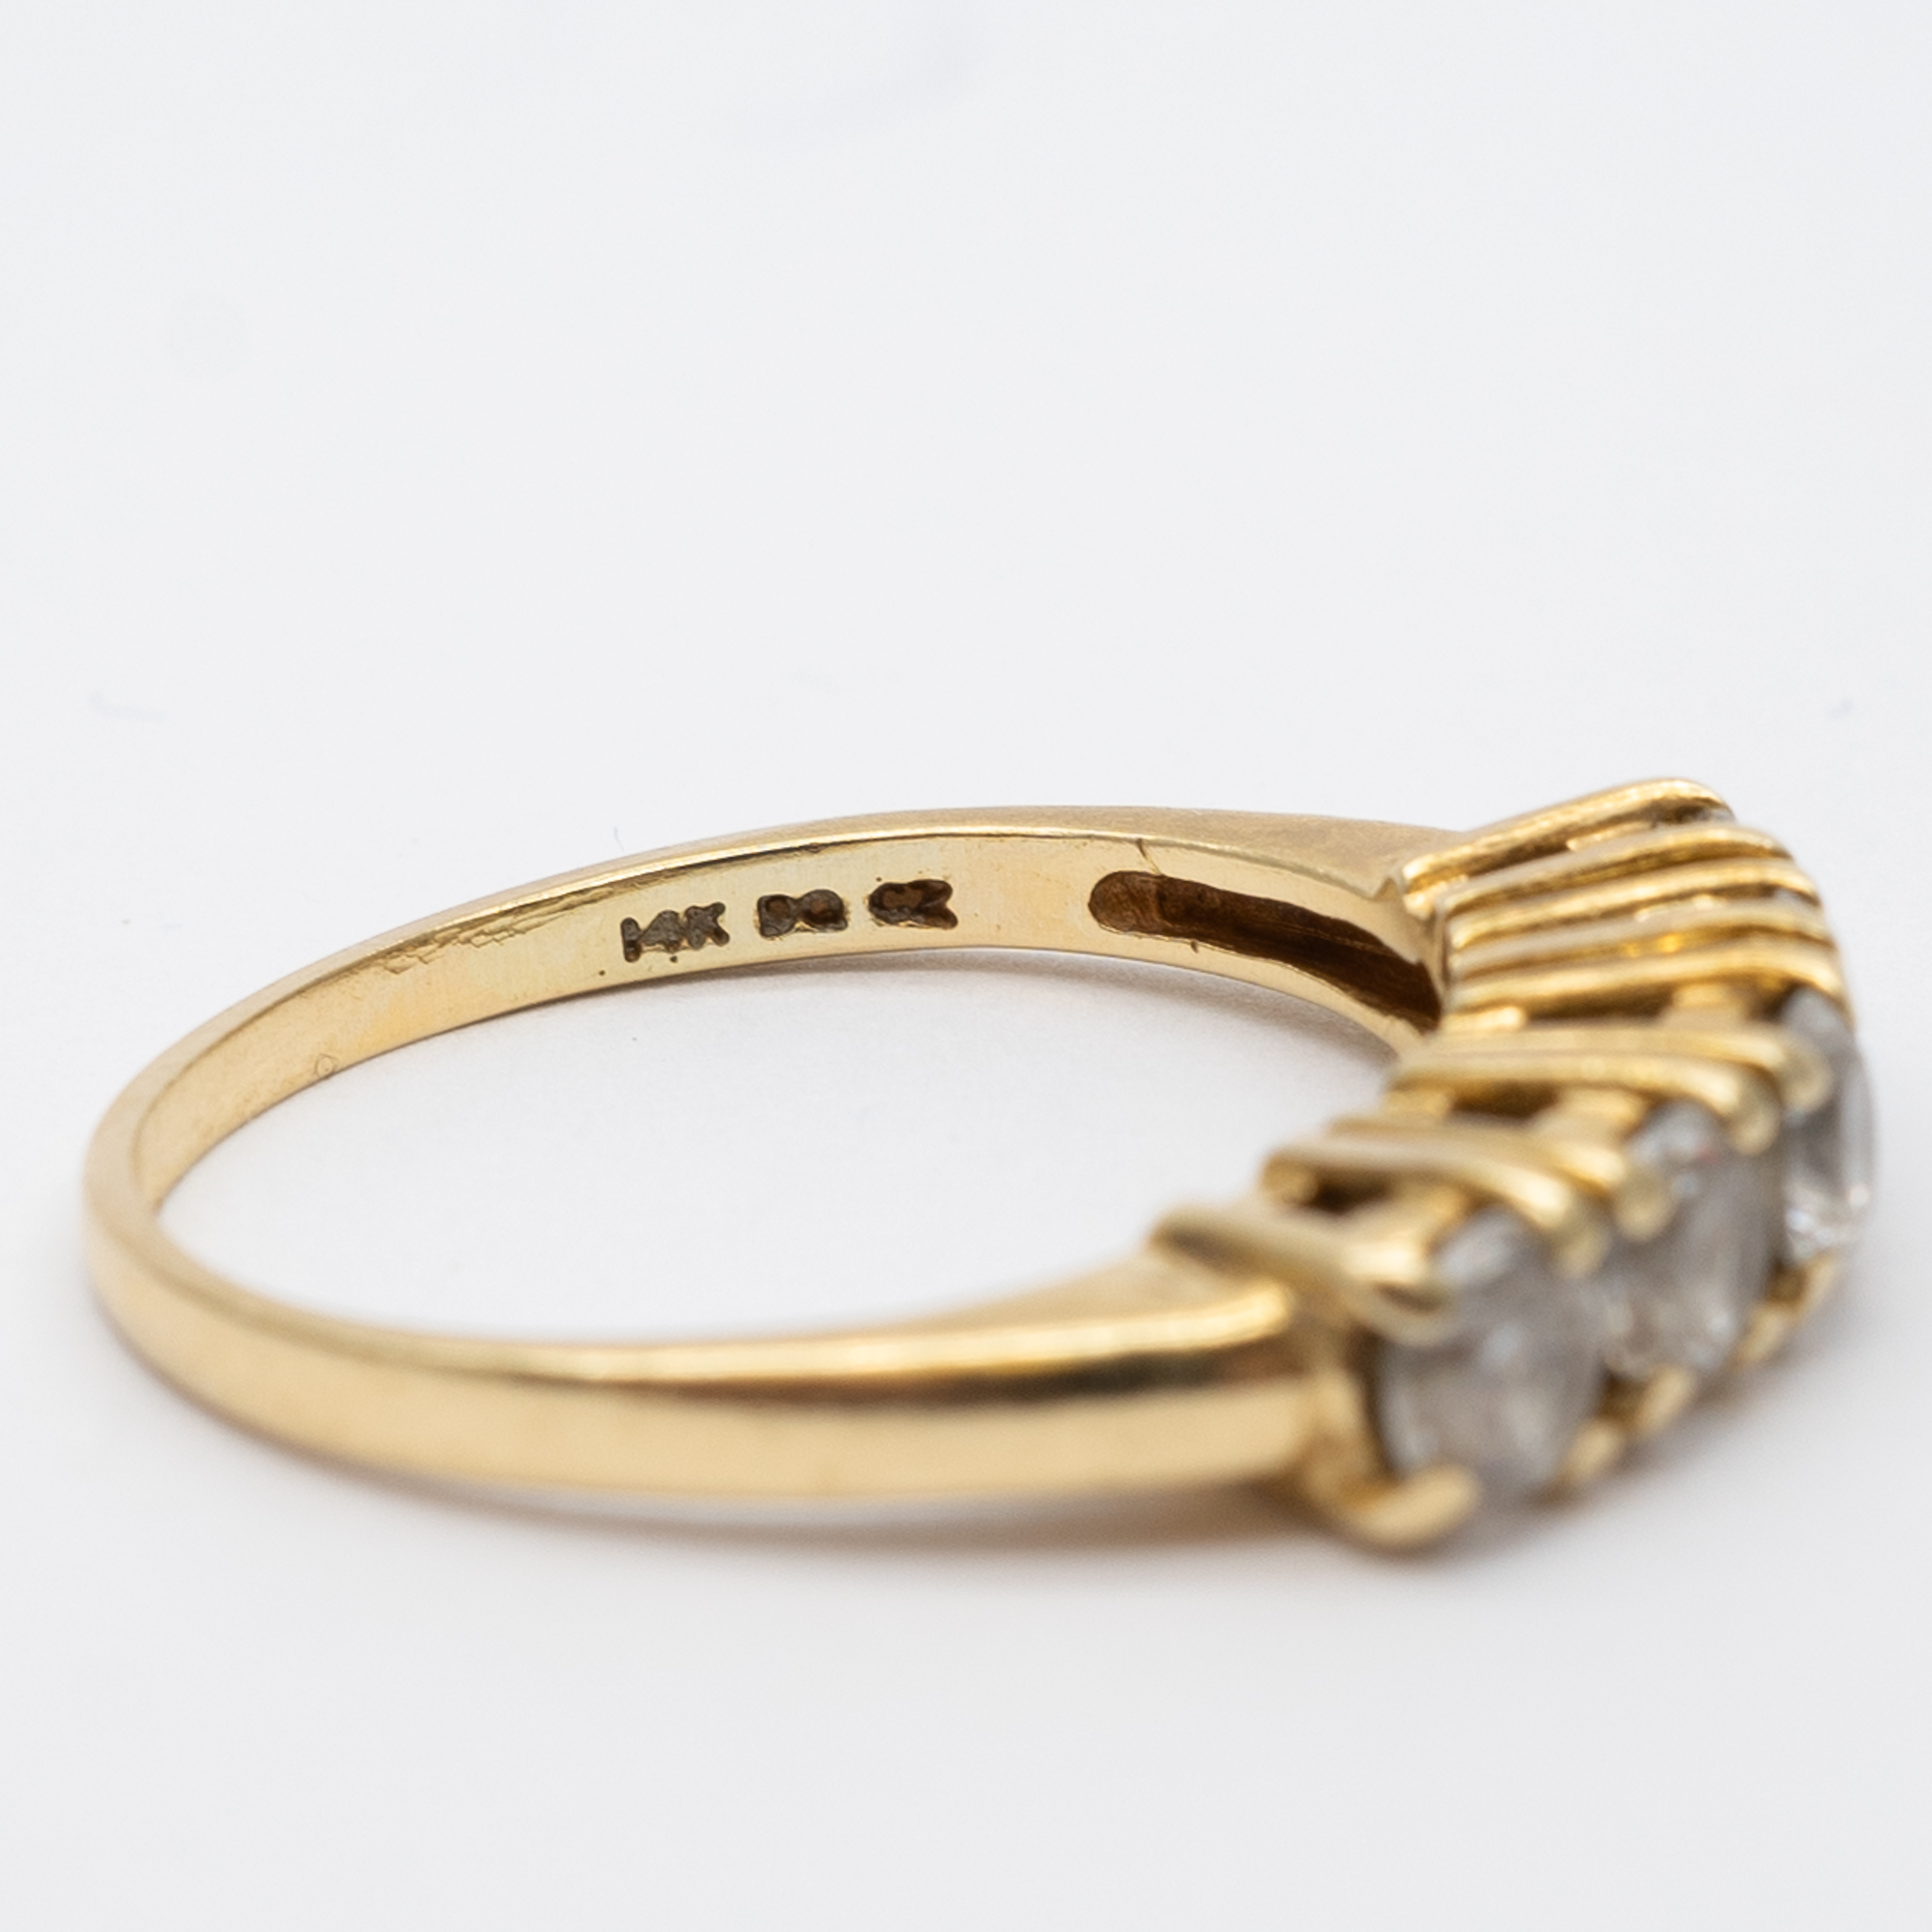 A 14ct yellow gold cz set eternity ring - Image 6 of 6